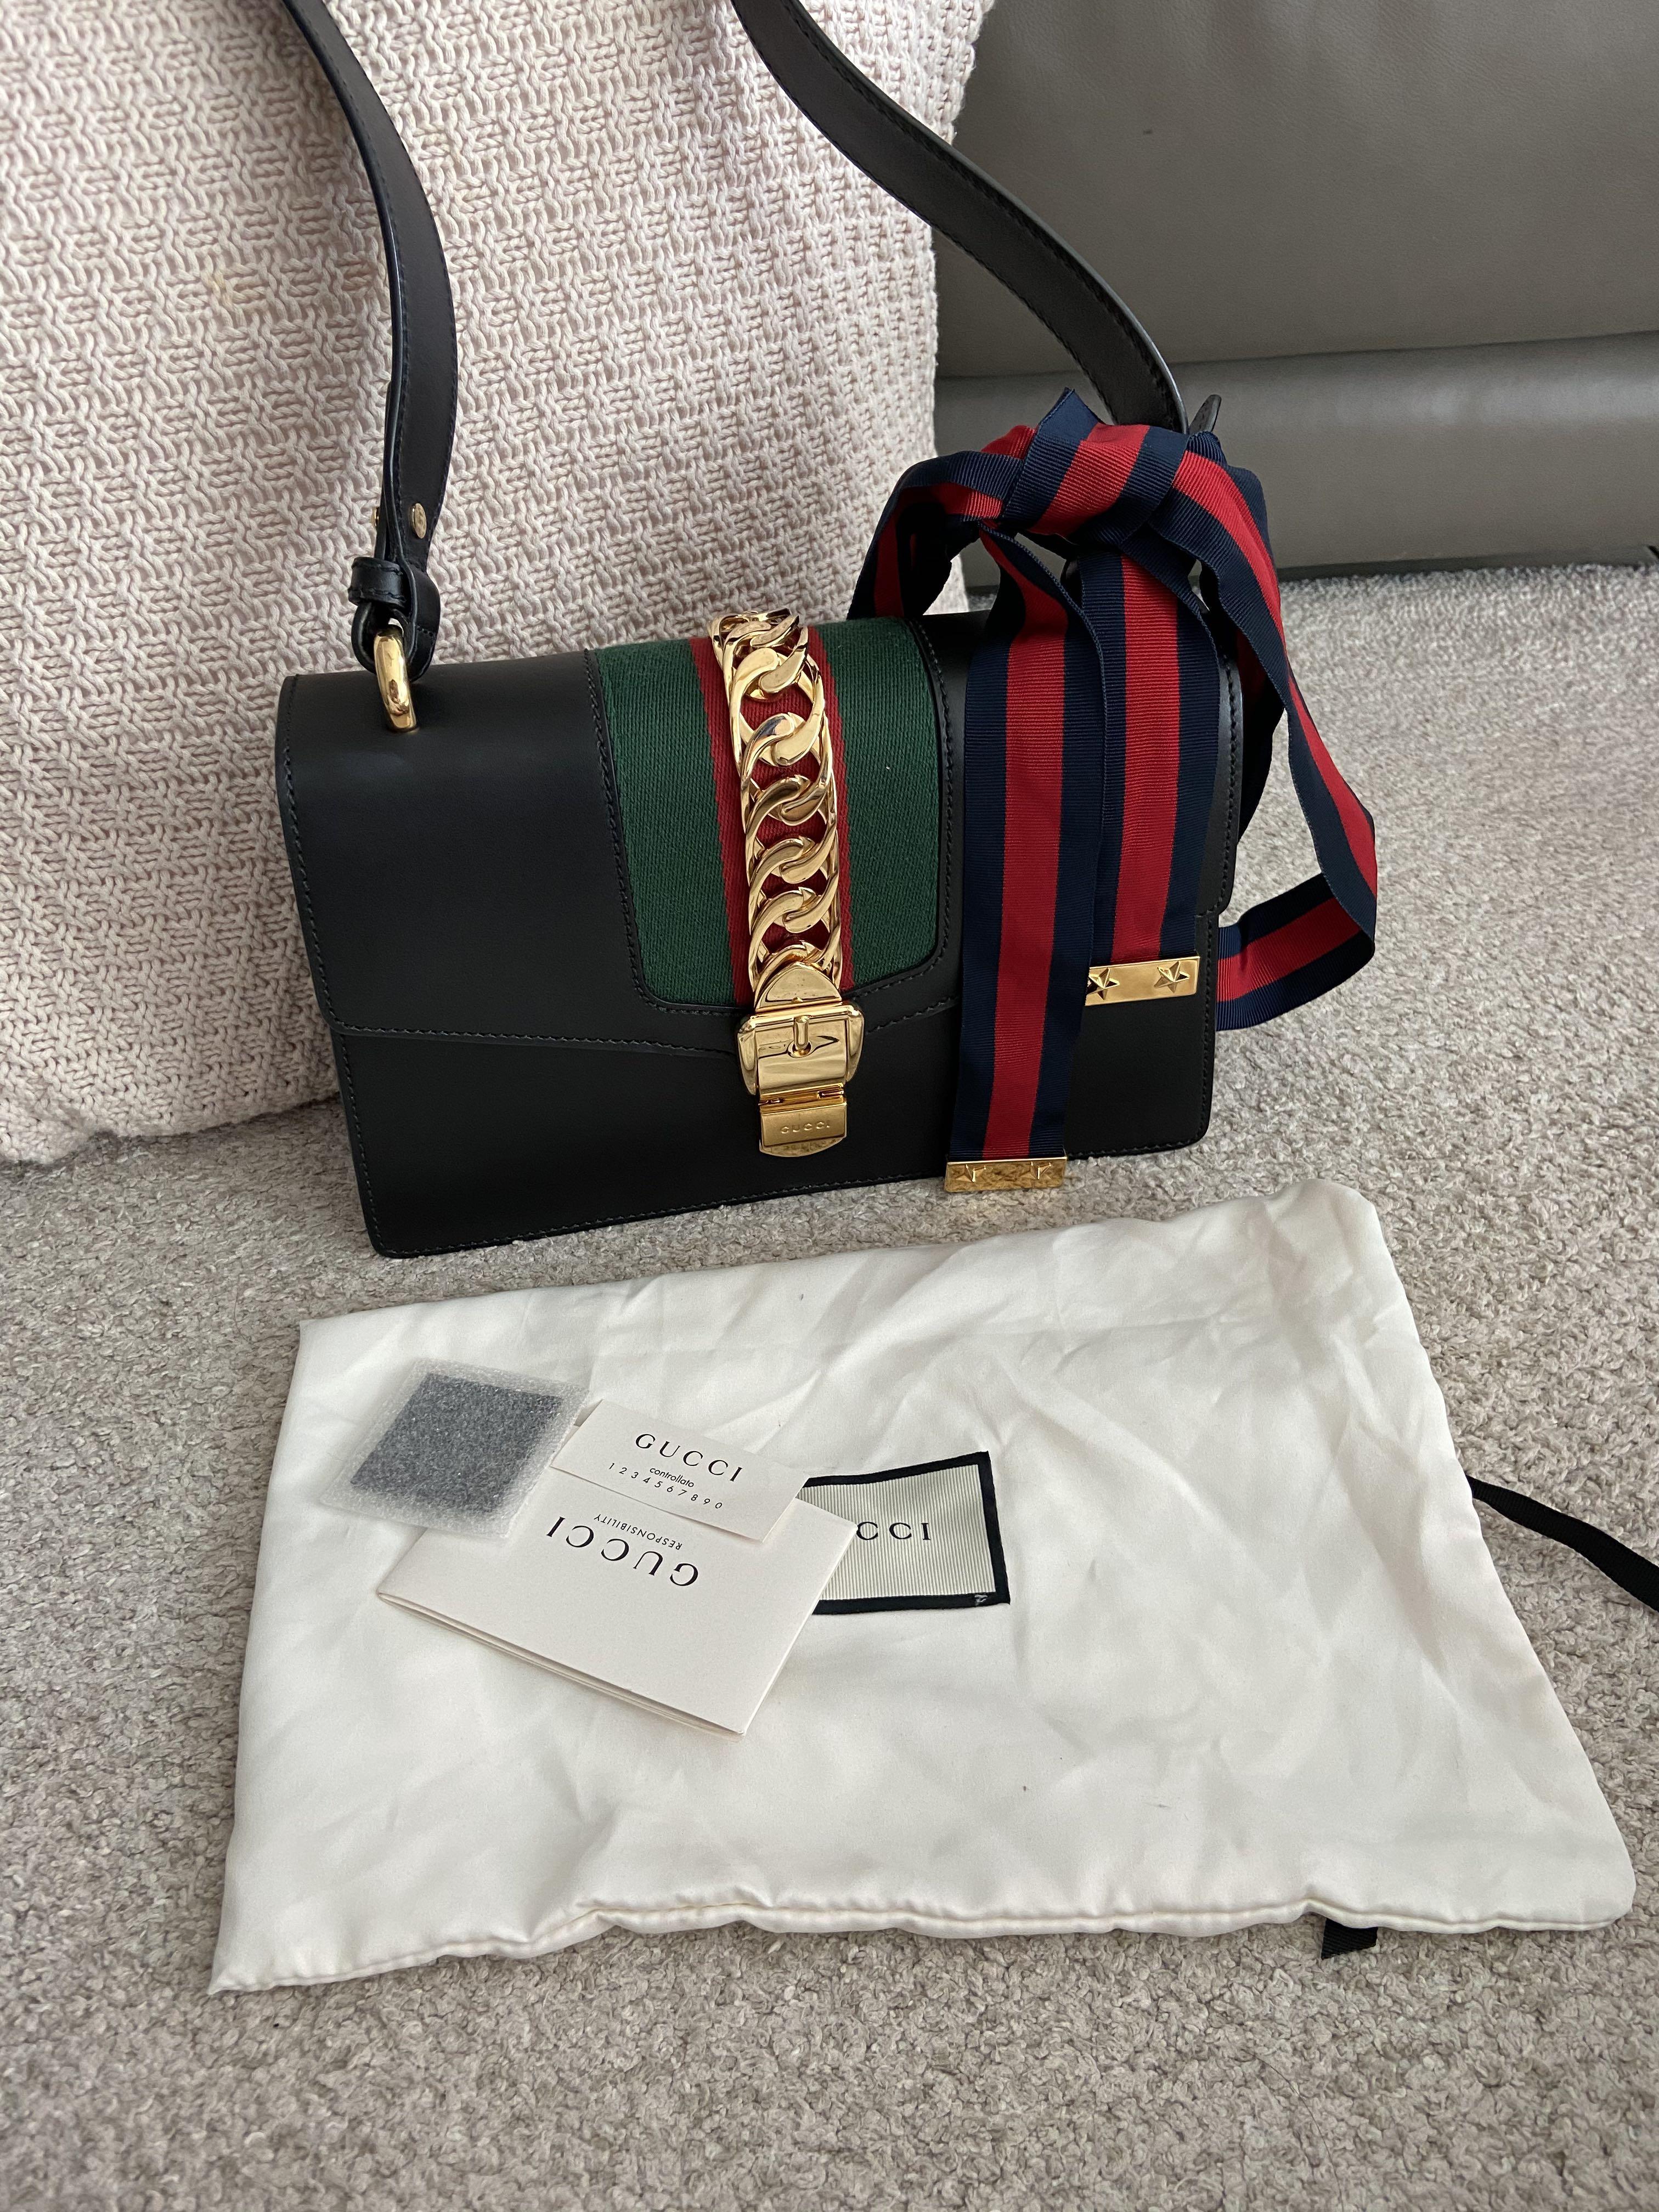 cheapest gucci products